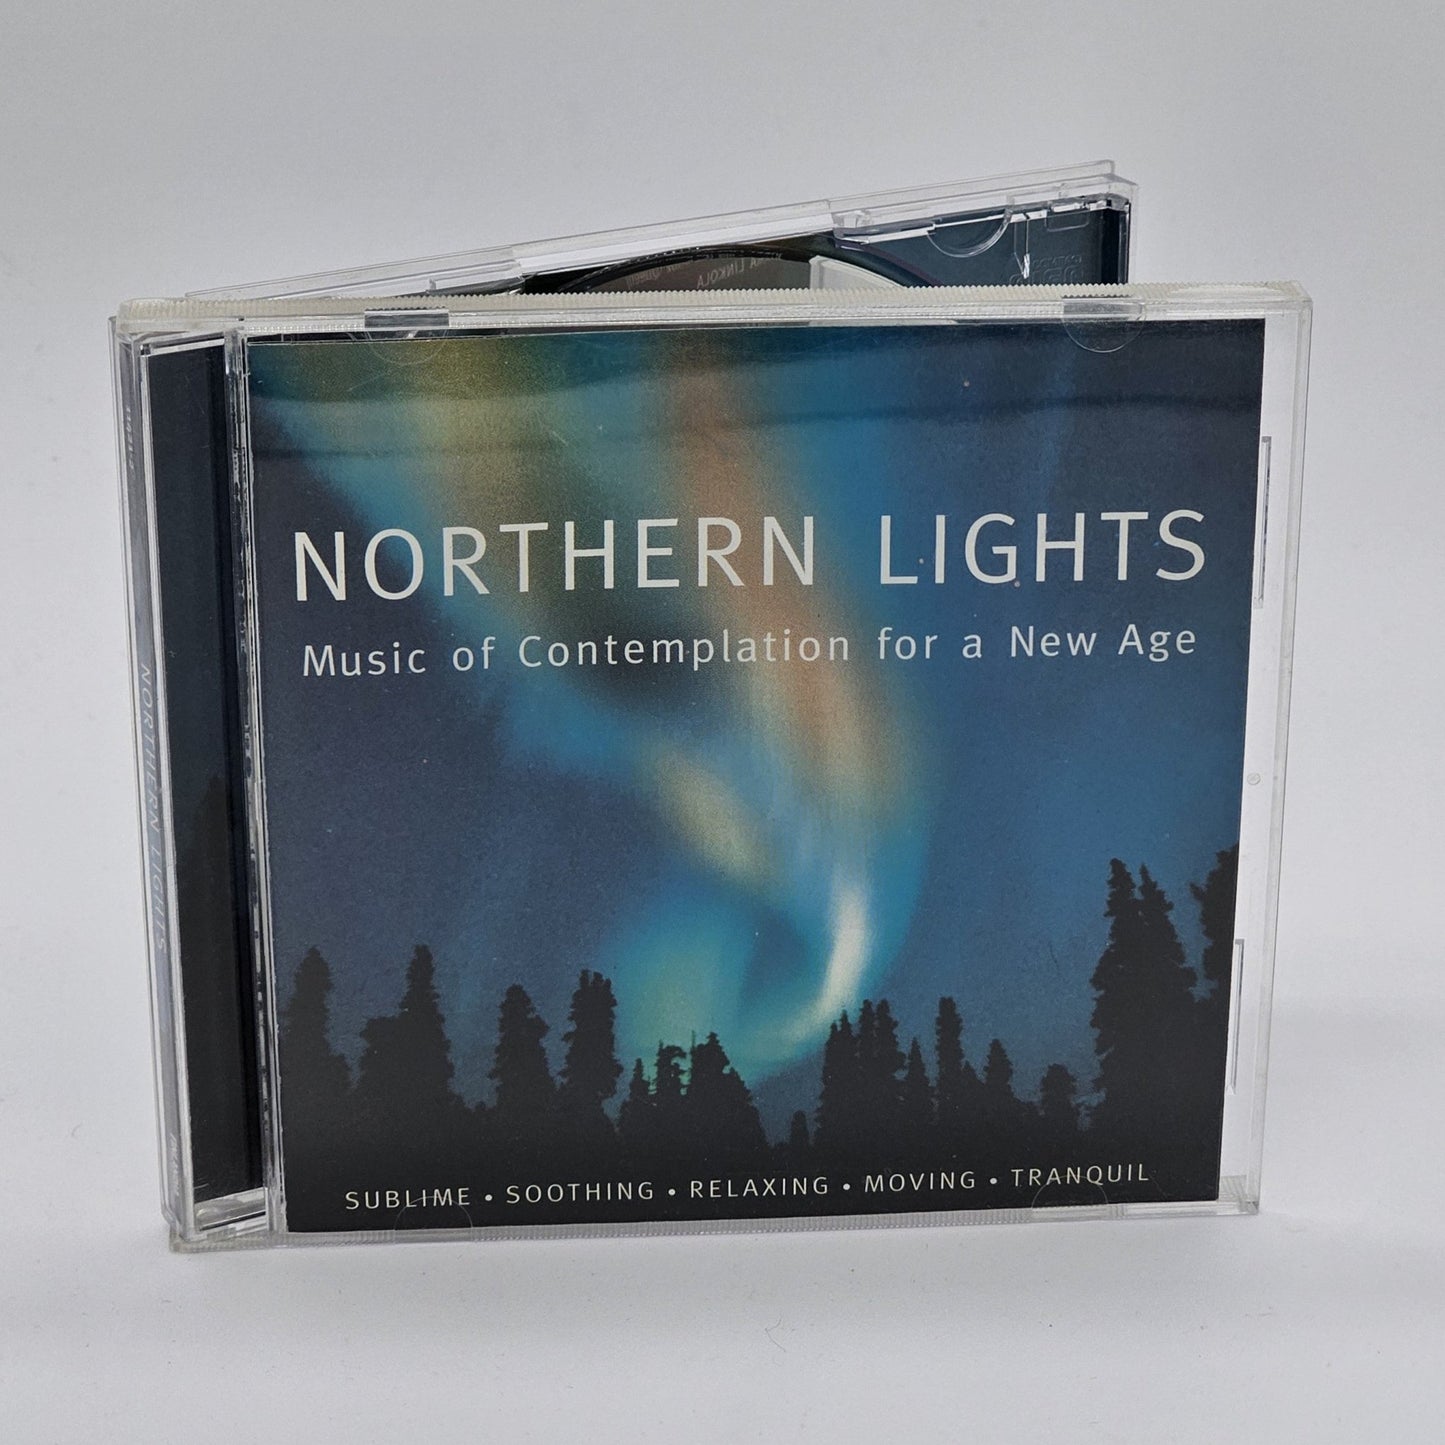 BMG Distributing - Northern Lights | Music of Contemplation For a New Age | CD - Compact Disc - Steady Bunny Shop